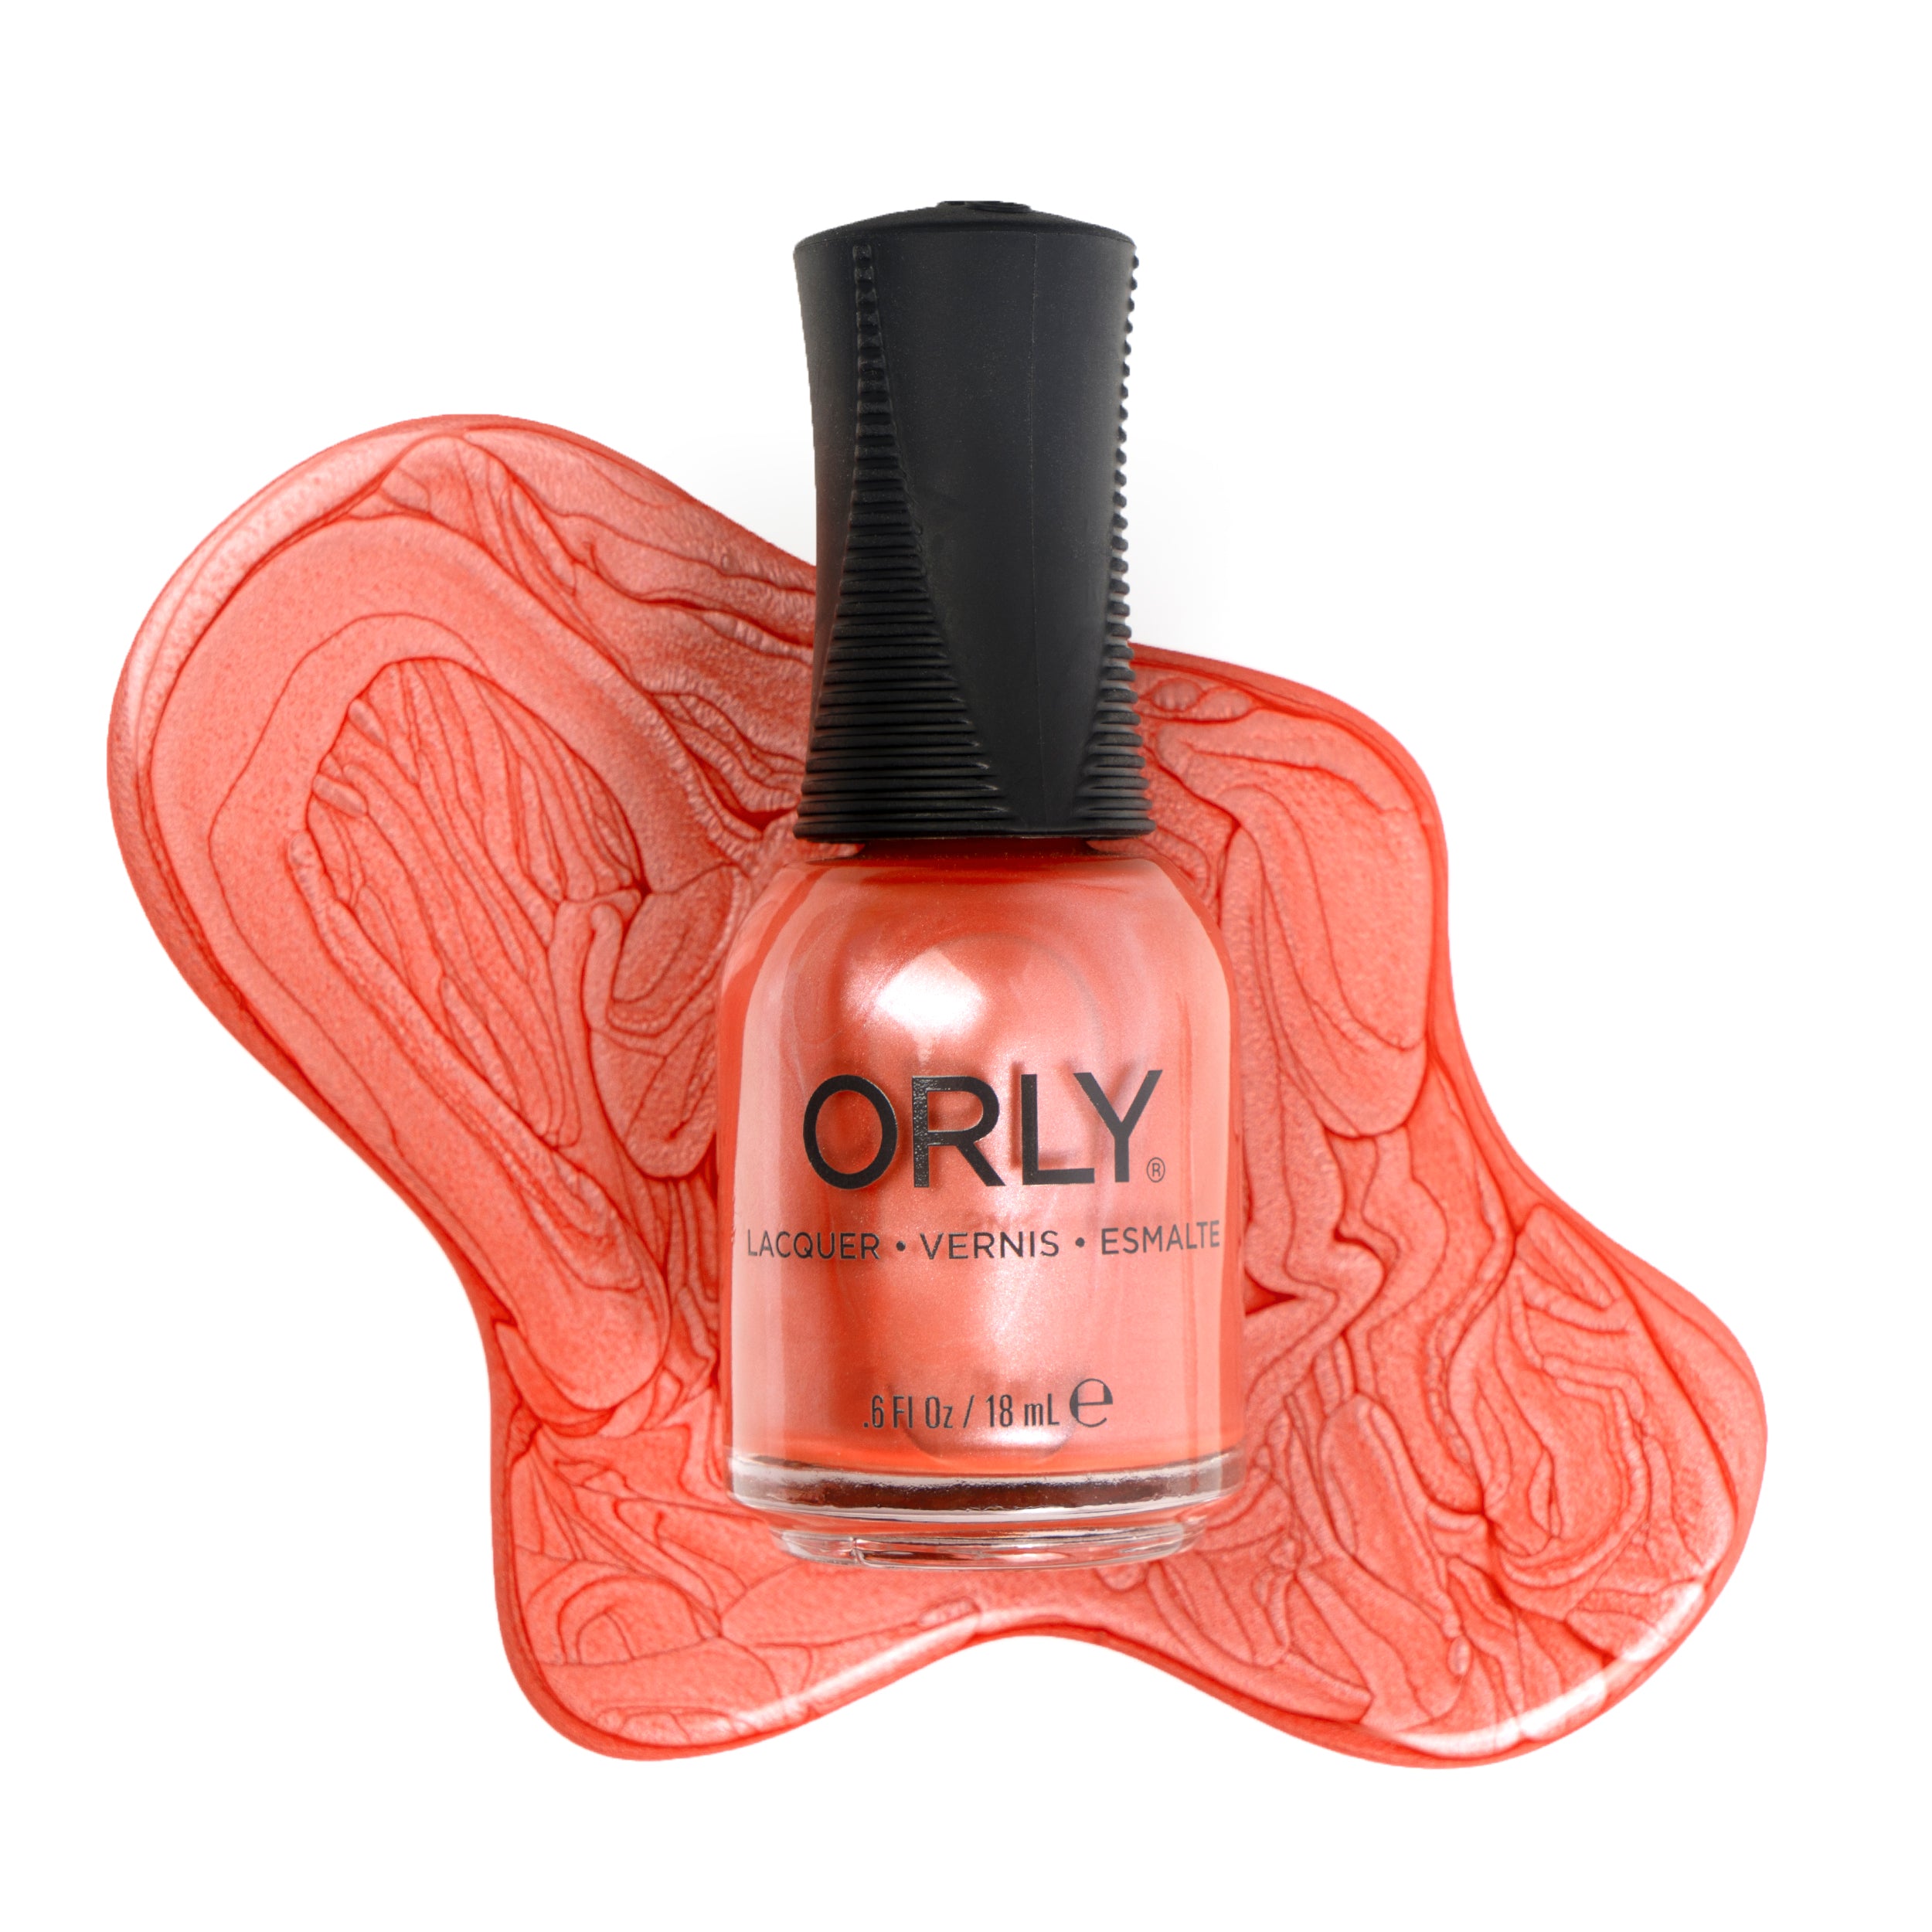 ORLY - Cruelty-Free Nail Polish, Gels, Treatments and Breathable